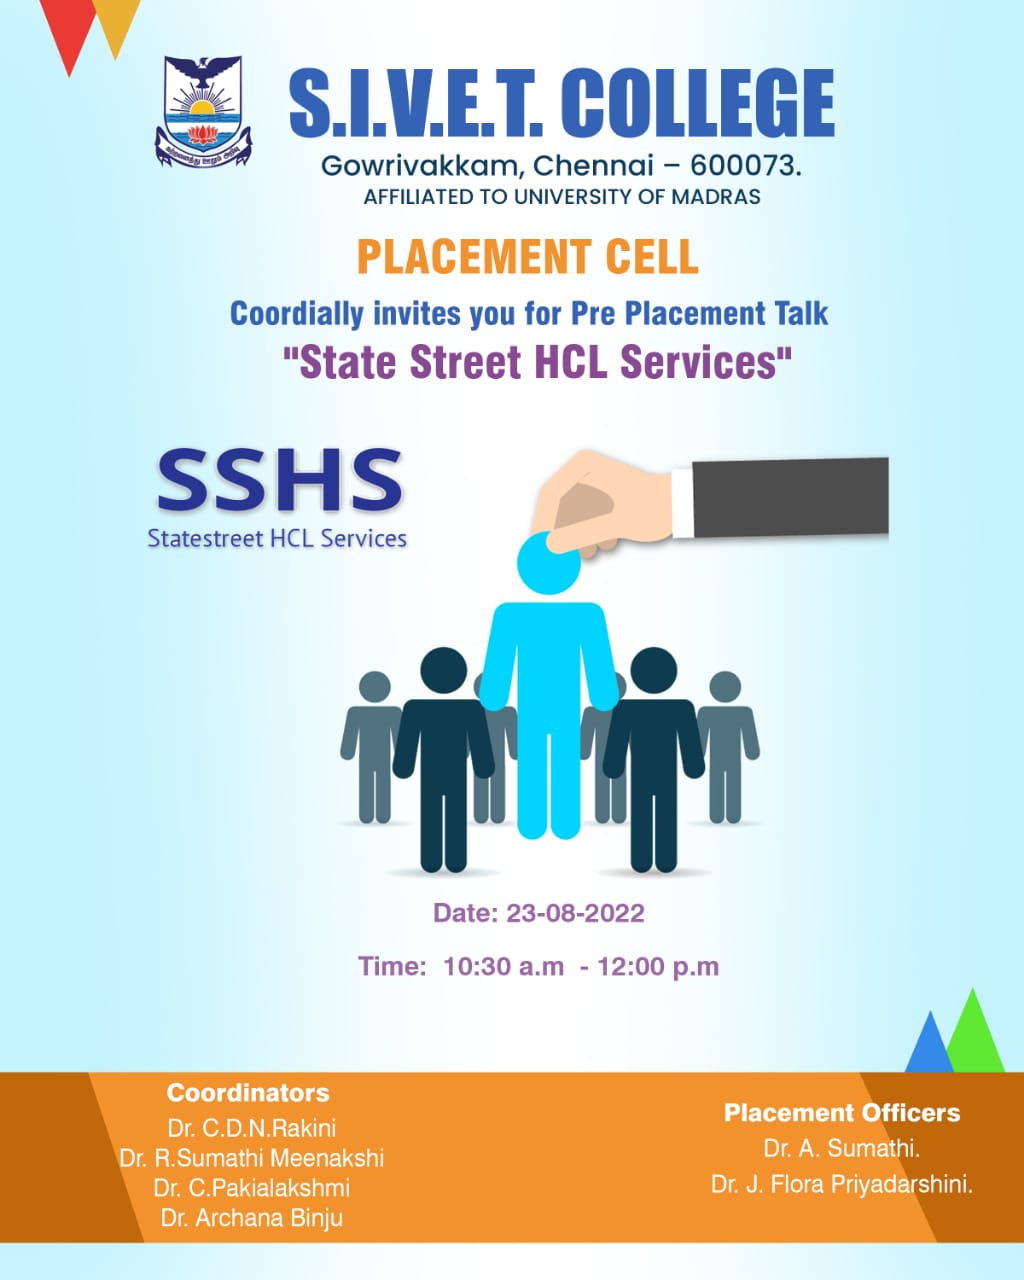 pre-placement-talk-state-street-hcl-services-s-i-v-e-t-college